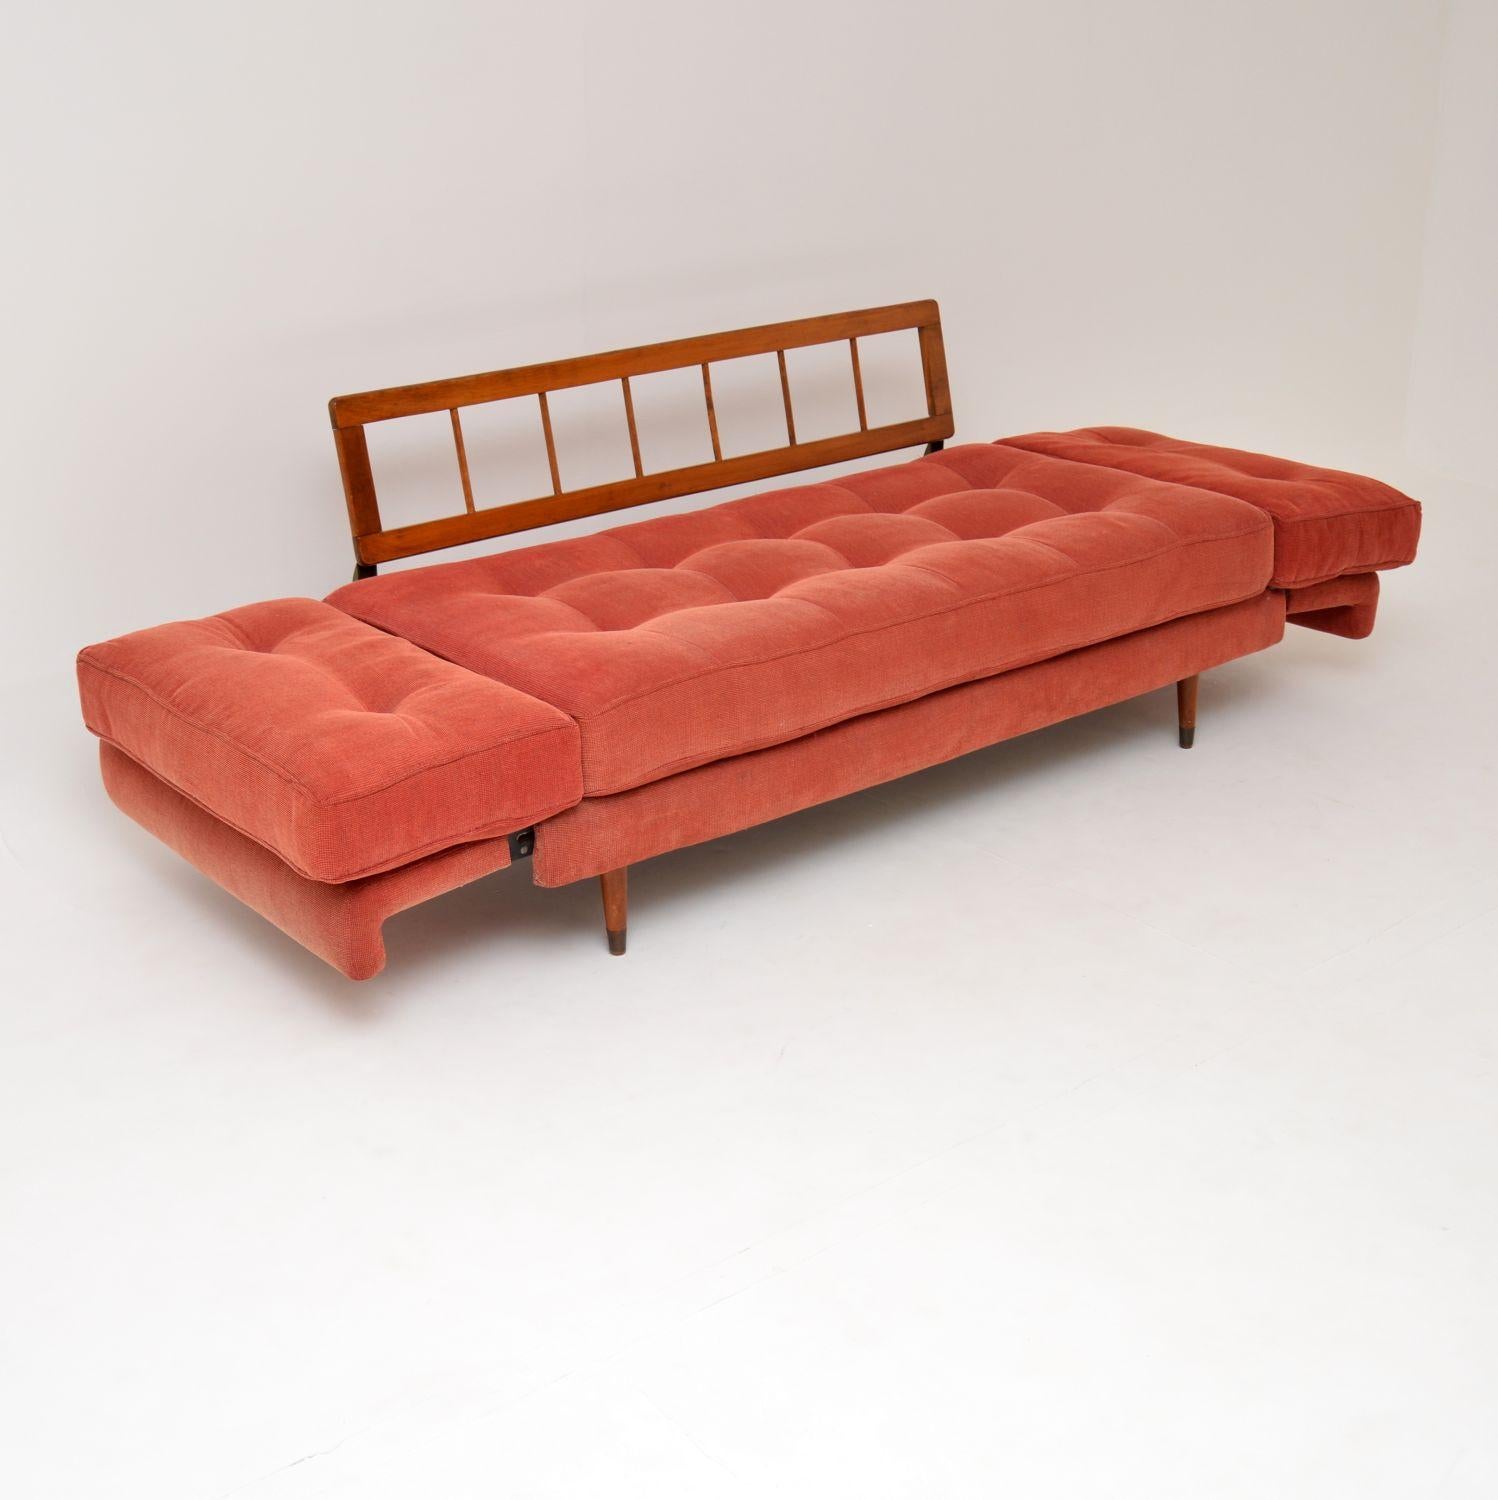 This is a beautiful and extremely comfortable vintage sofa bed, dating from the 1950s-1960s. It was recently re-upholstered by the previous owner in this gorgeous and amazing quality pale pink fabric. The arms lift up and drop to to open this out,